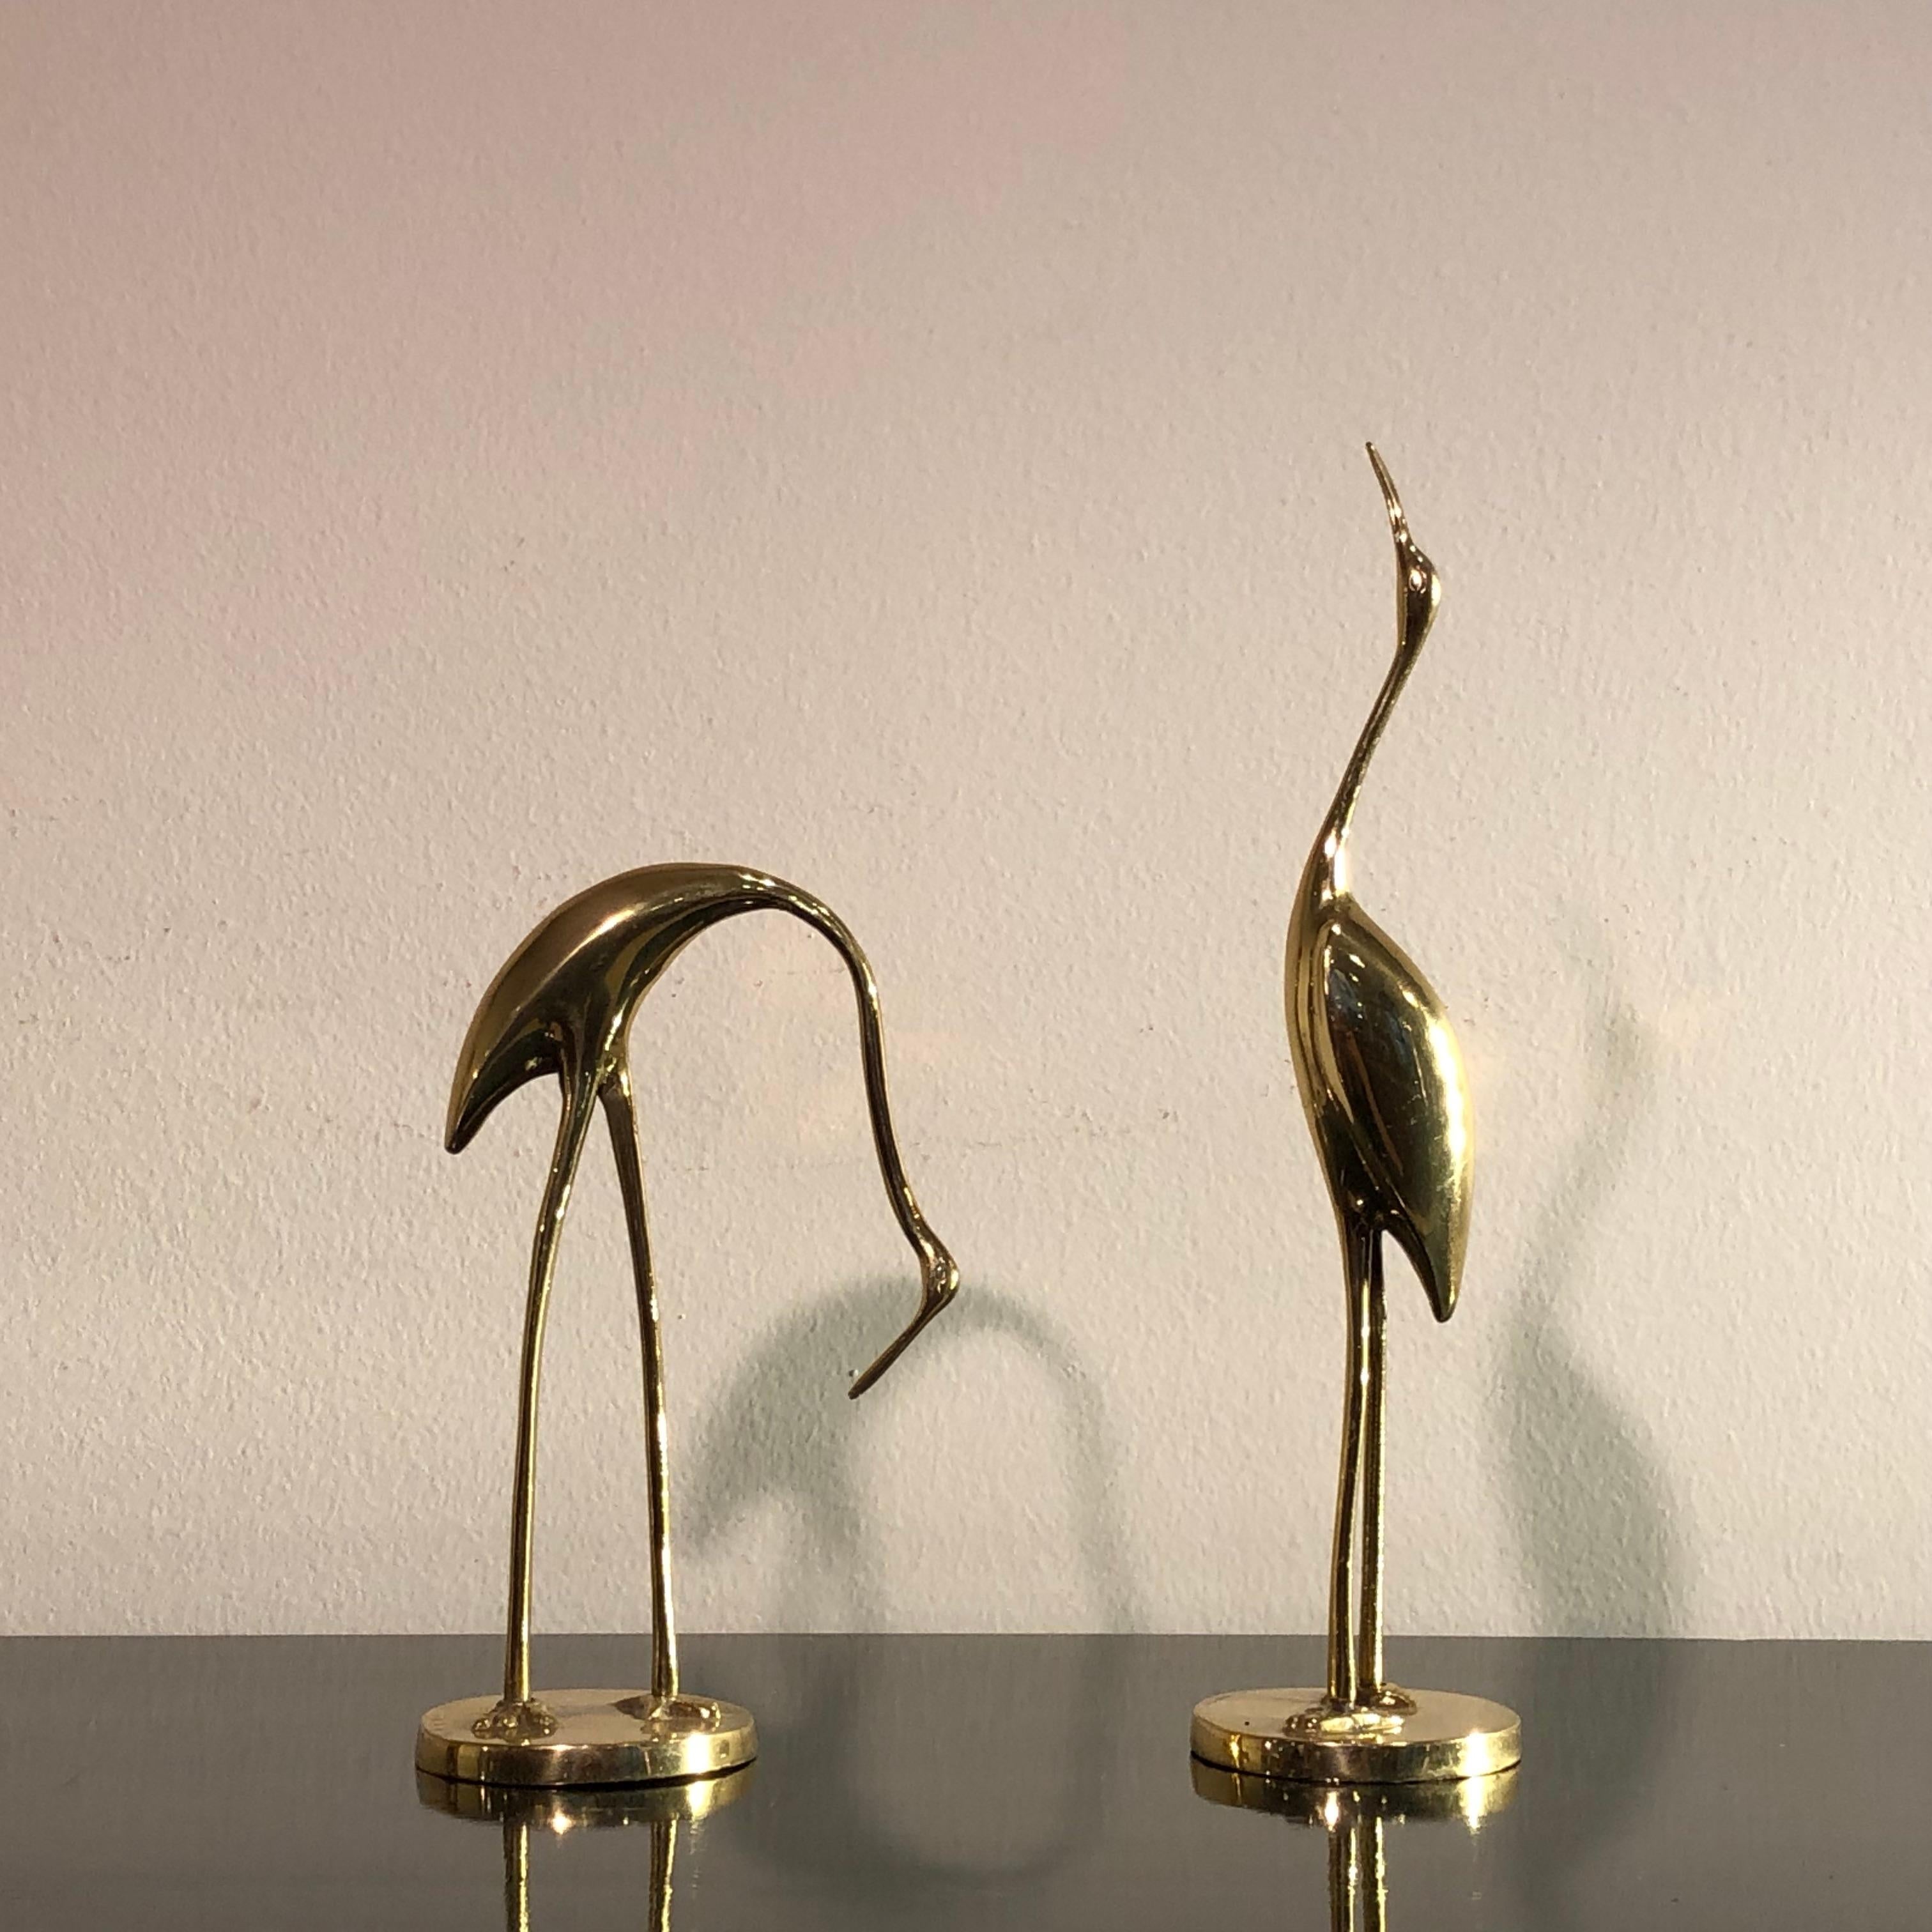 Gold brass little herons form France from 1970s. Rounded base, original patina not restored. Ideal for a charming Christmas or Wedding present. Size: high 30 cm and 21 cm, base 8 cm diameter.